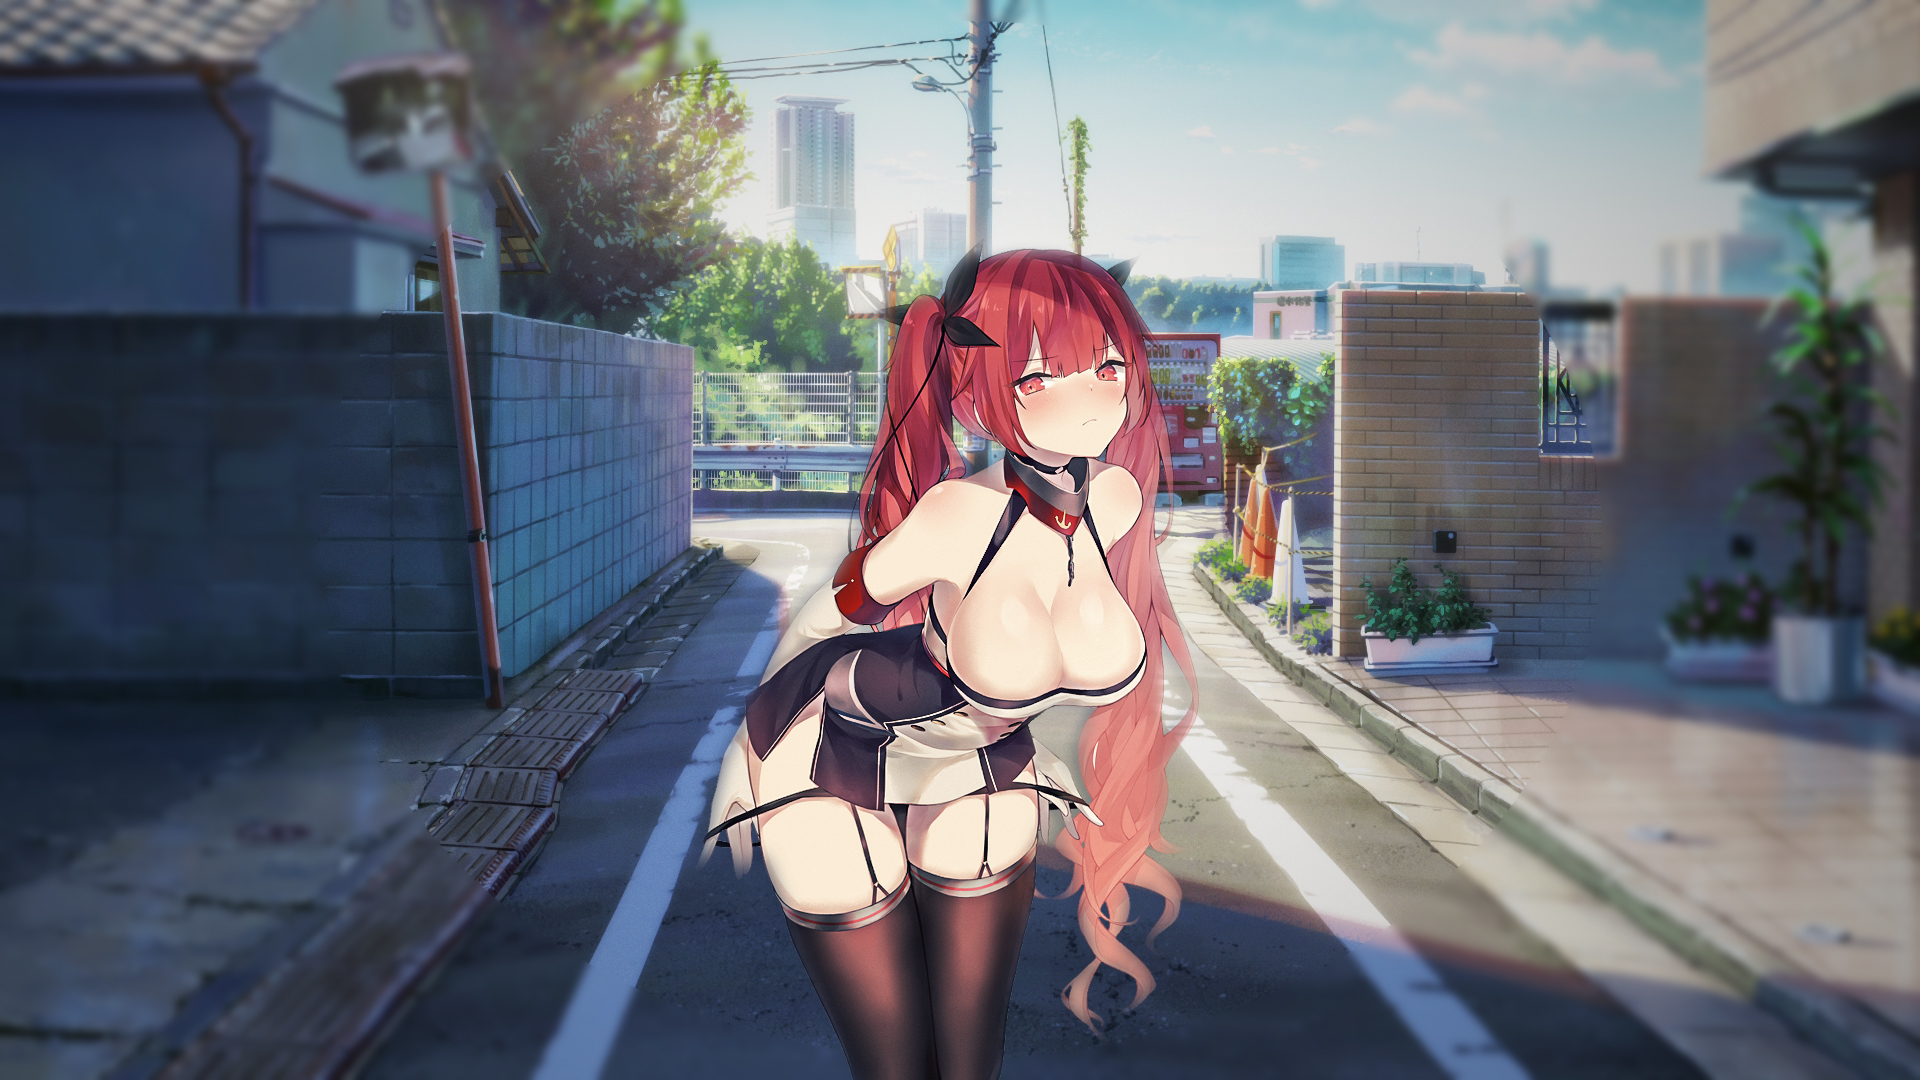 Anime 1920x1080 anime anime girls women city painting big boobs boobs pants Azur Lane picture-in-picture blurred vending machine traffic mirror Japan traffic cone street bent over undressing panties down urban redhead outdoors women outdoors bright